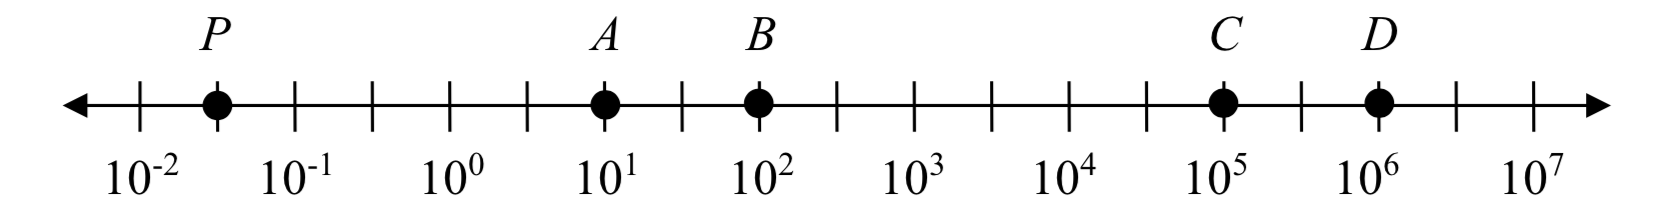 A numberline with equally spaced ticks labeled 10 to the negative 2, 10 to the negative 1, 10 to the zero, 10 to the 1, 10 to the 2, and so on up to 10 to the 7.  There are 5 points labeled: P at 10 to the negative 1.5, A at 10 to the 1, B at 10 to the 2, C at 10 to the 5, and D at 10 to the 6.